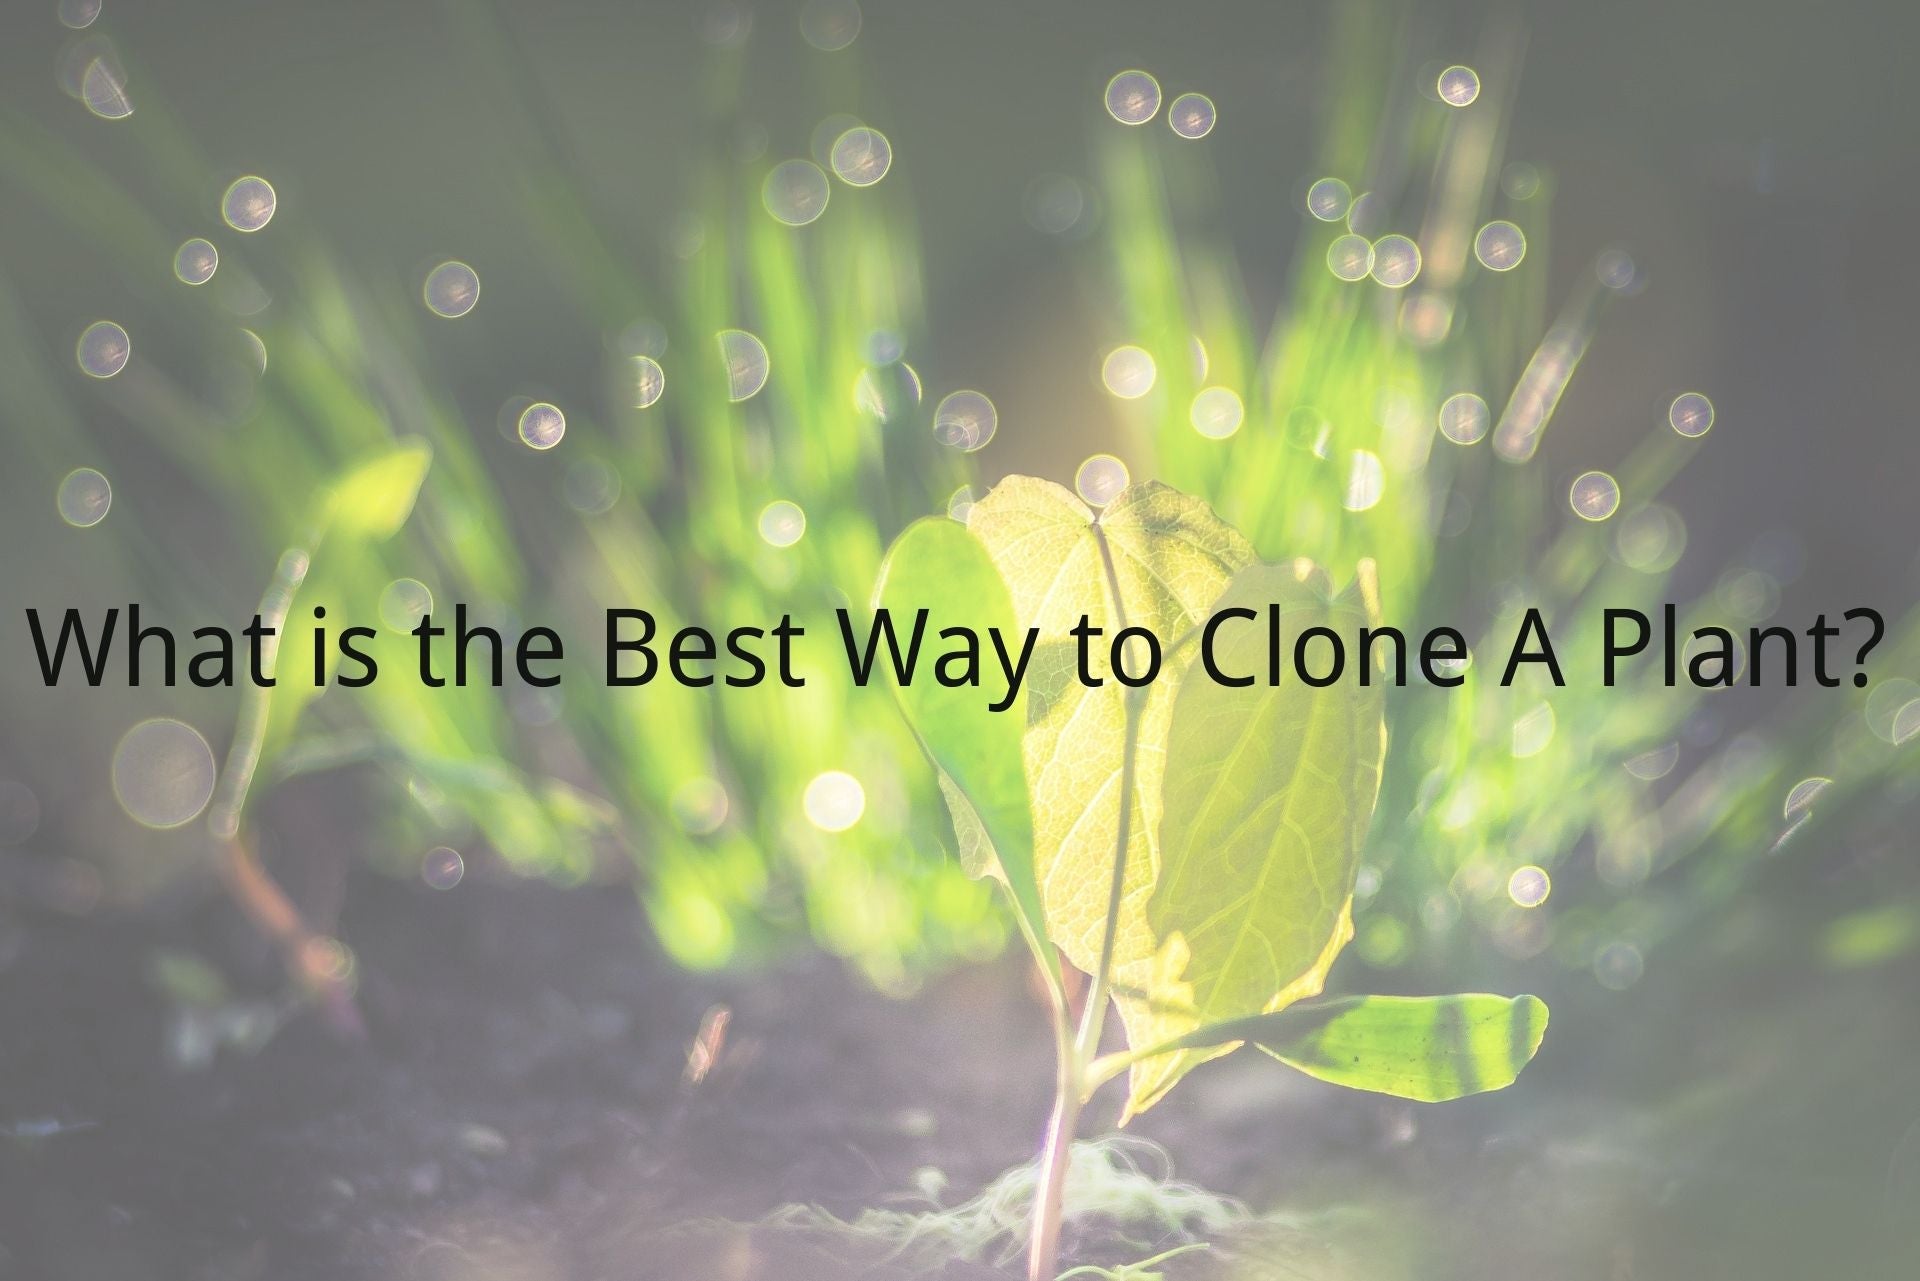 the best way to clone a plant